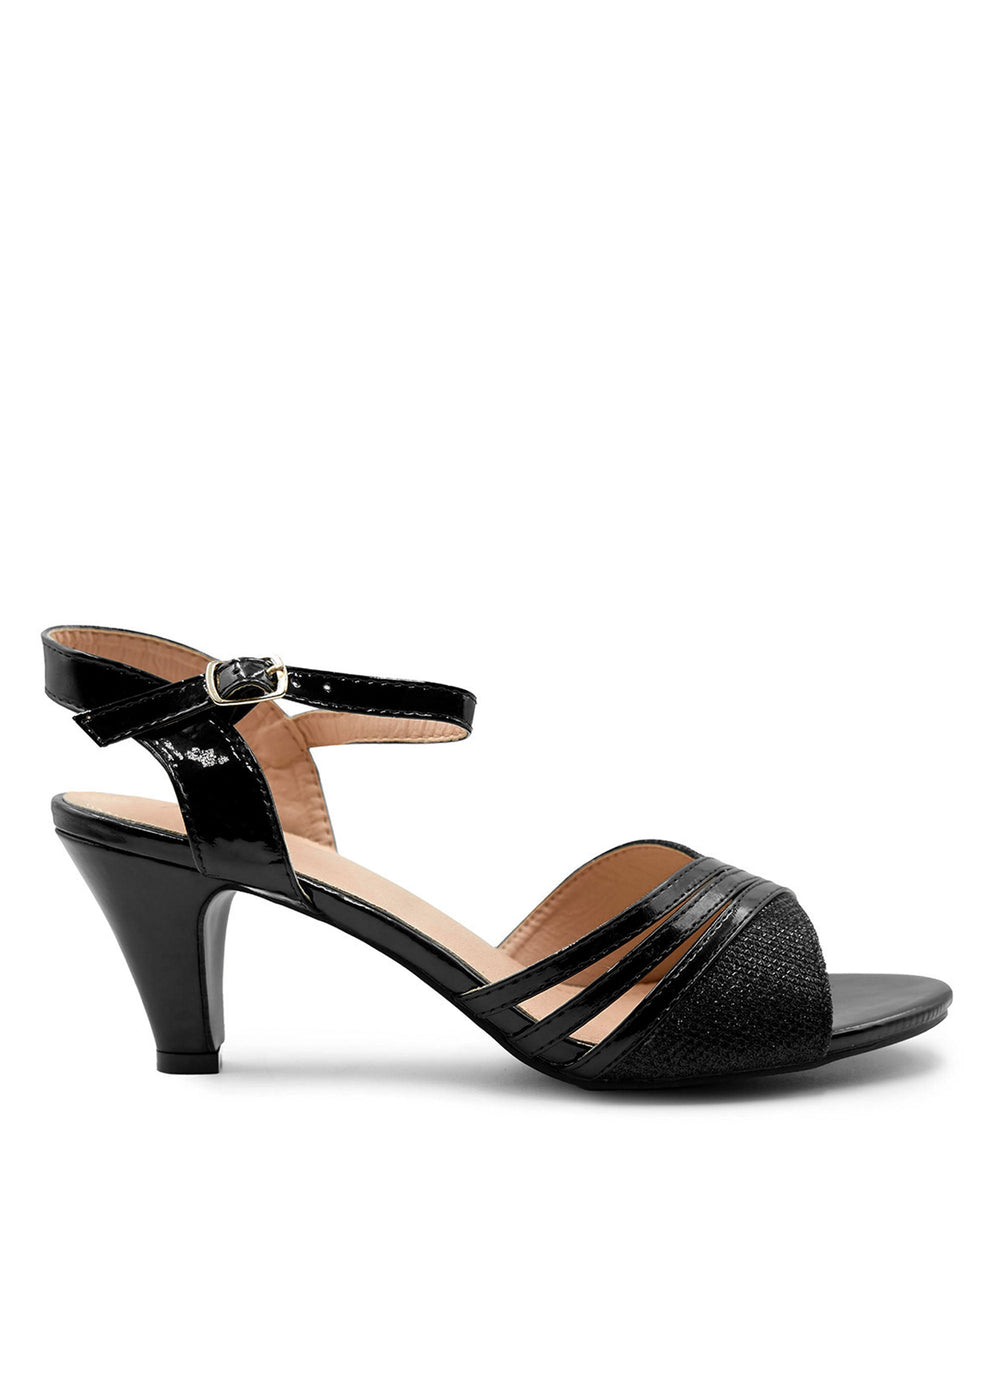 STORMI LOW HEEL SANDALS WITH BUCKLE ANKLE STRAP IN BLACK GLITTER